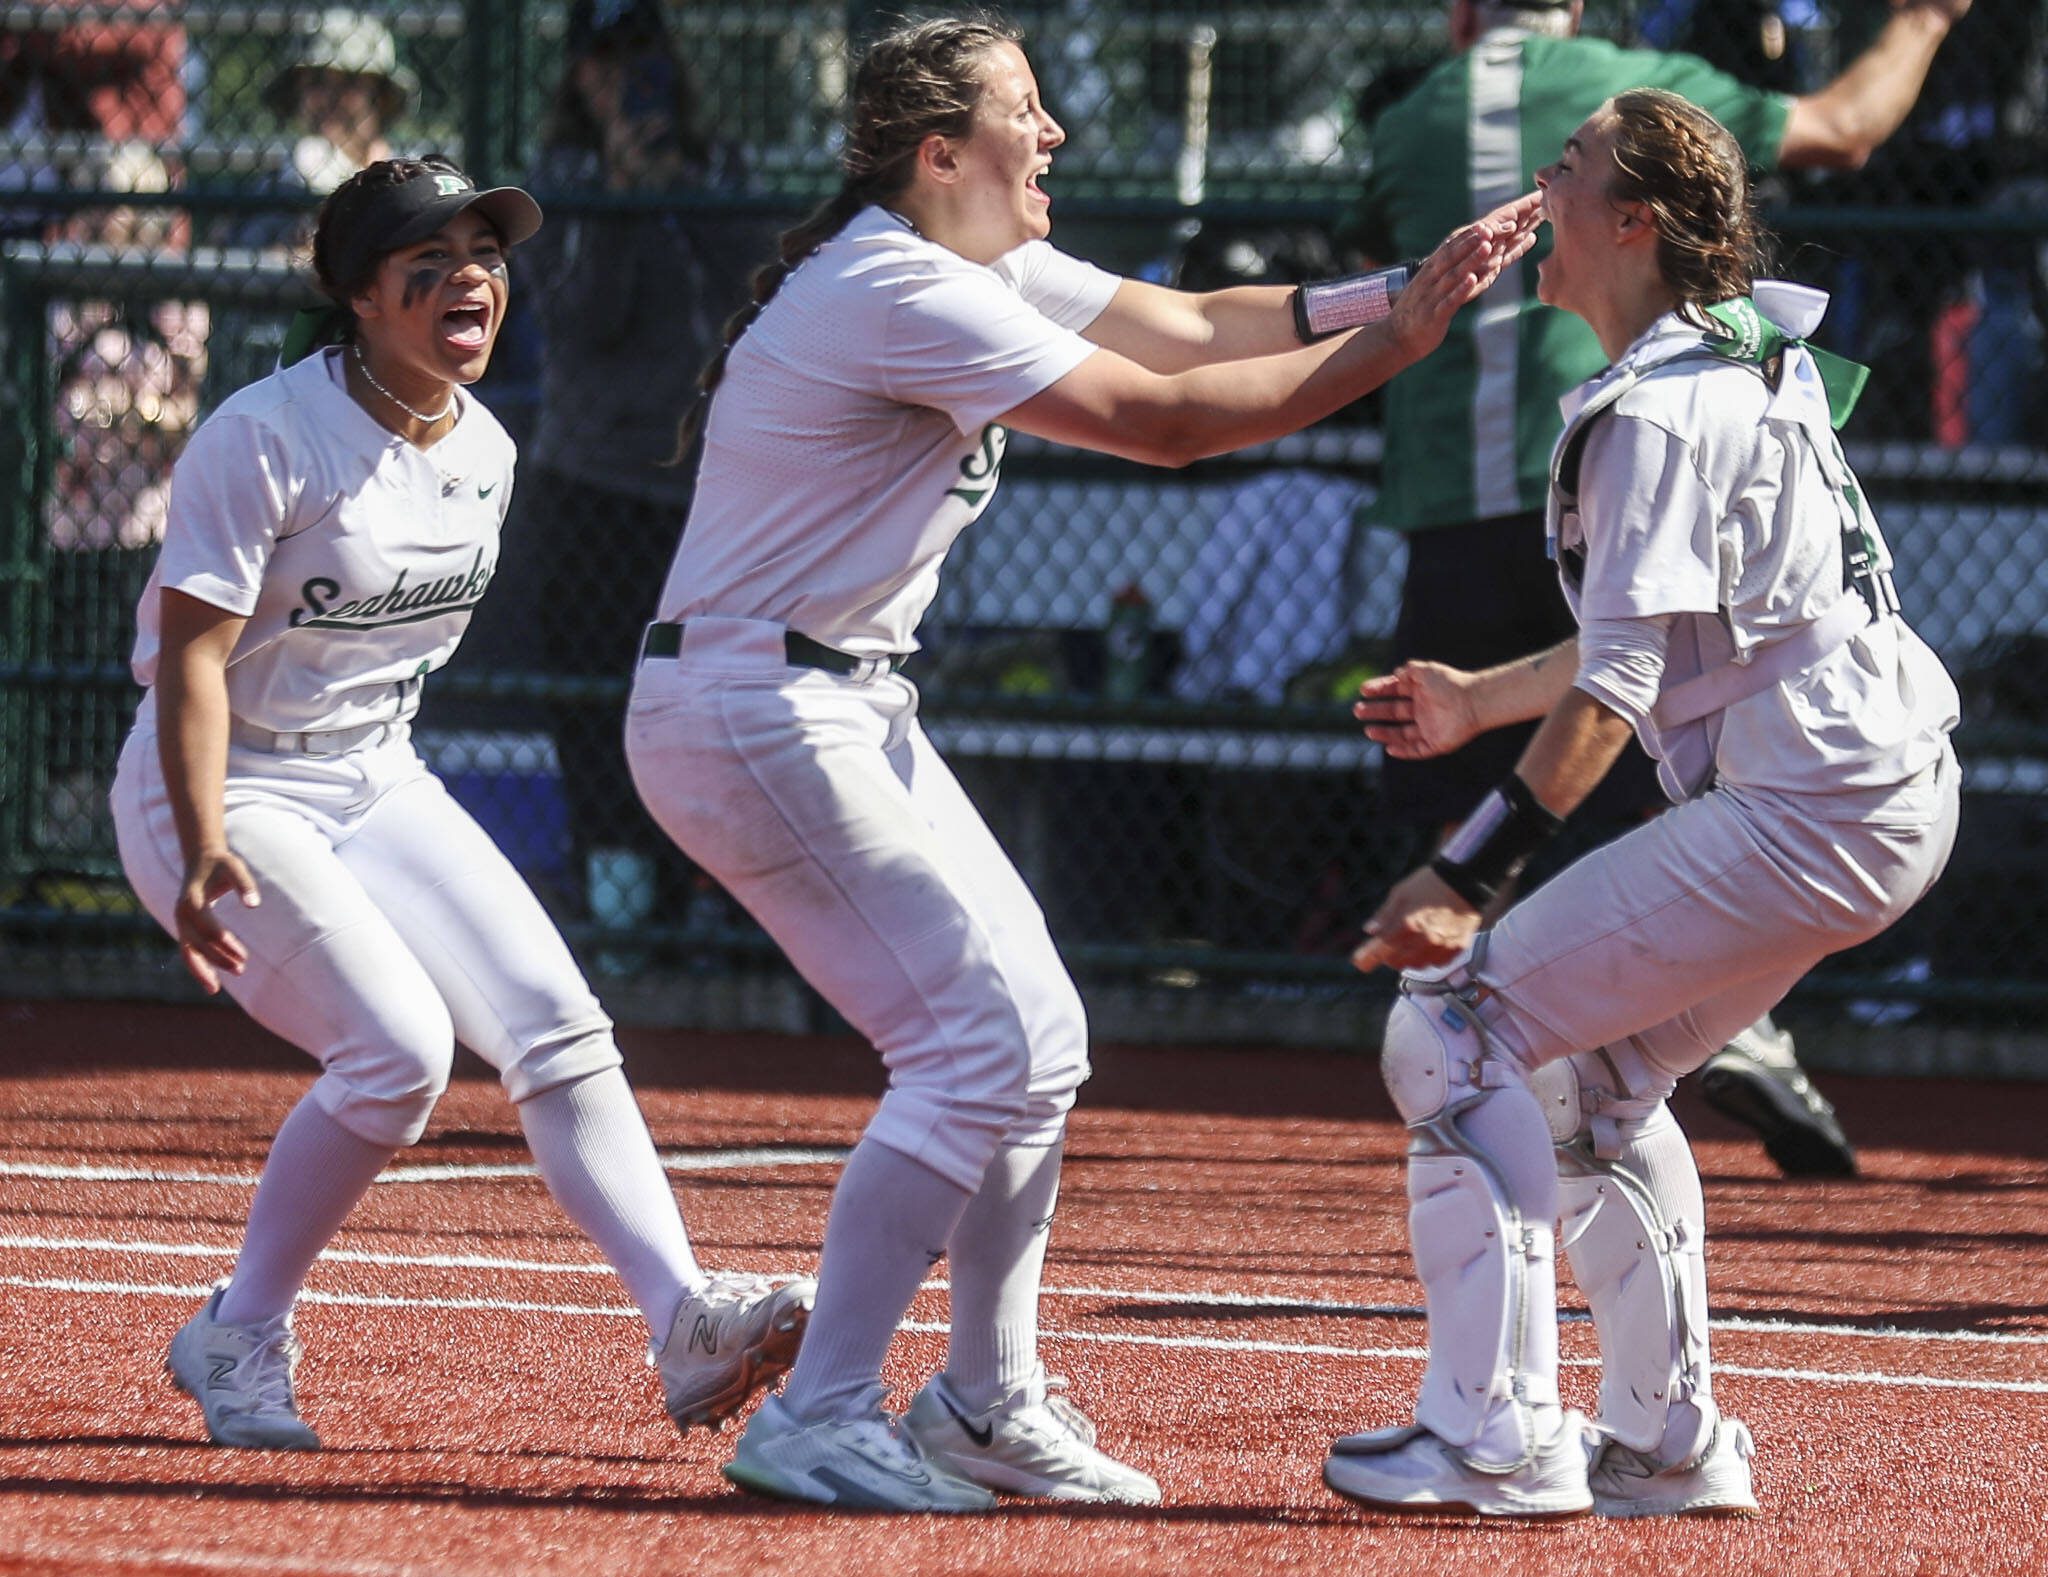 Peninsula players celebrate during the 3A softball championship game between Snohomish and Peninsula at the Lacey-Thurston County Regional Athletic Complex in Olympia, Washington on Saturday, May 27, 2023. Snohomish lost, 4-1. (Annie Barker / The Herald)